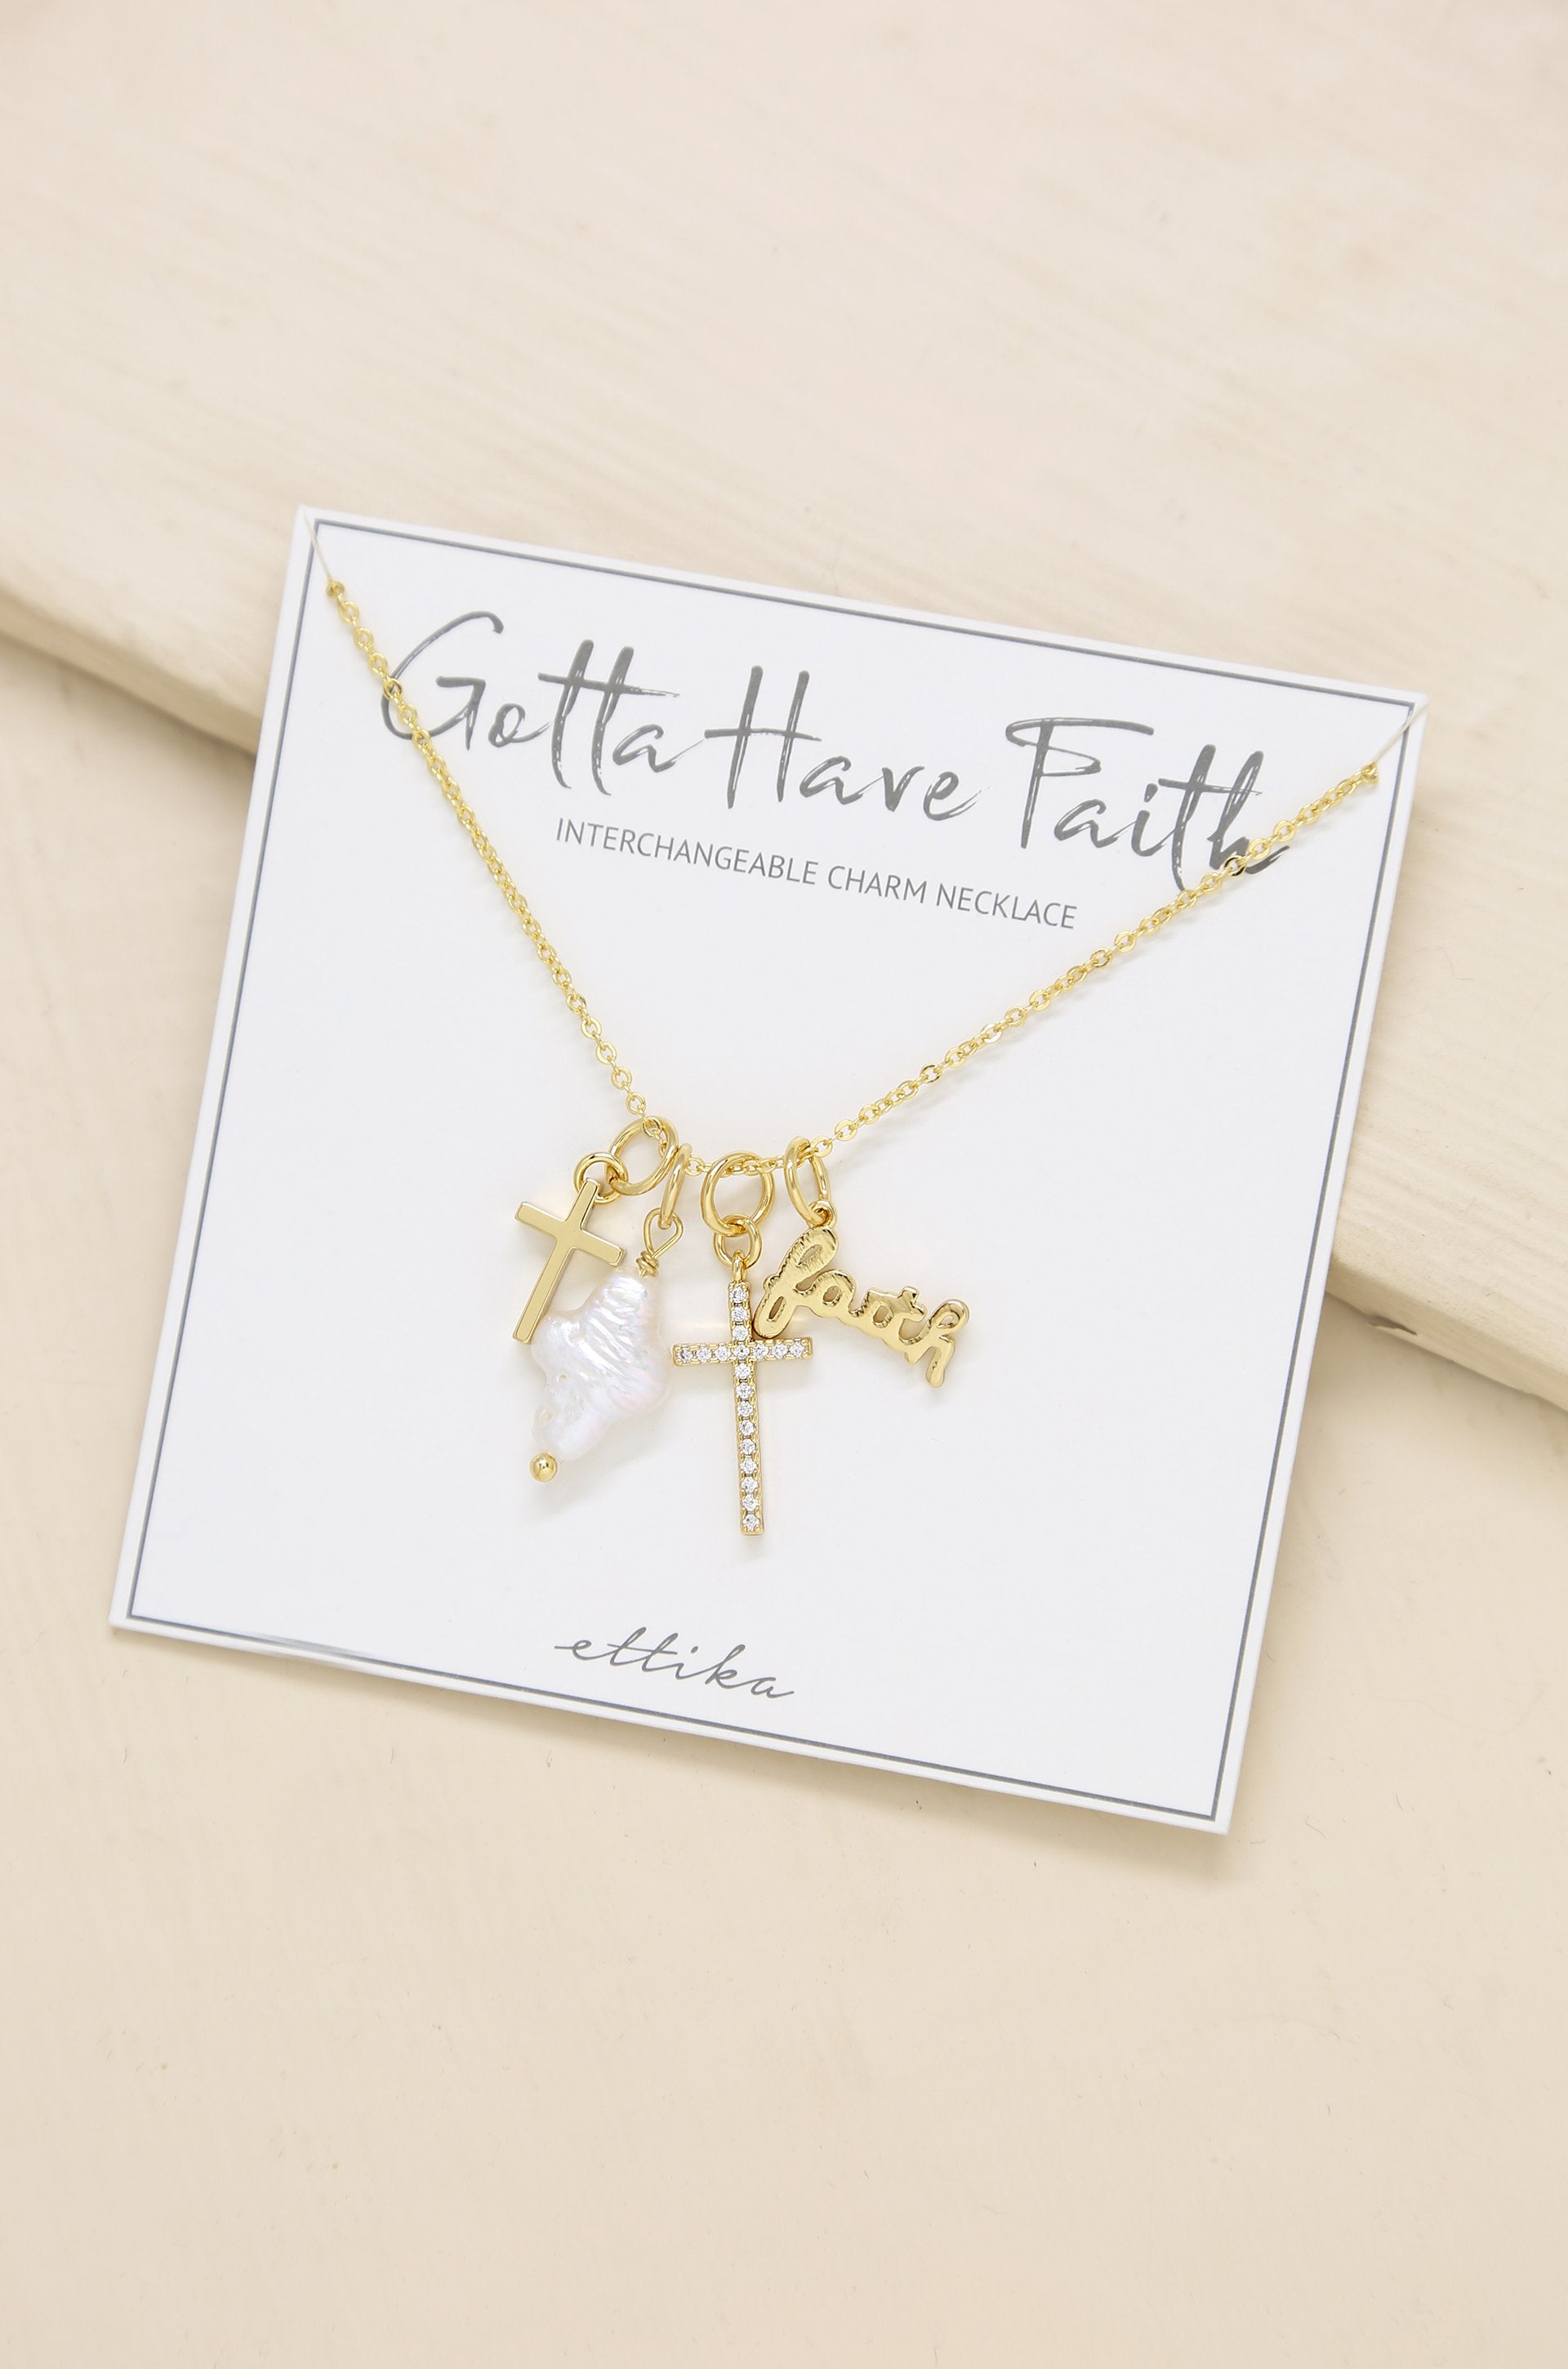 Gotta Have Faith 18k Gold Plated Interchangeable Charm Necklace